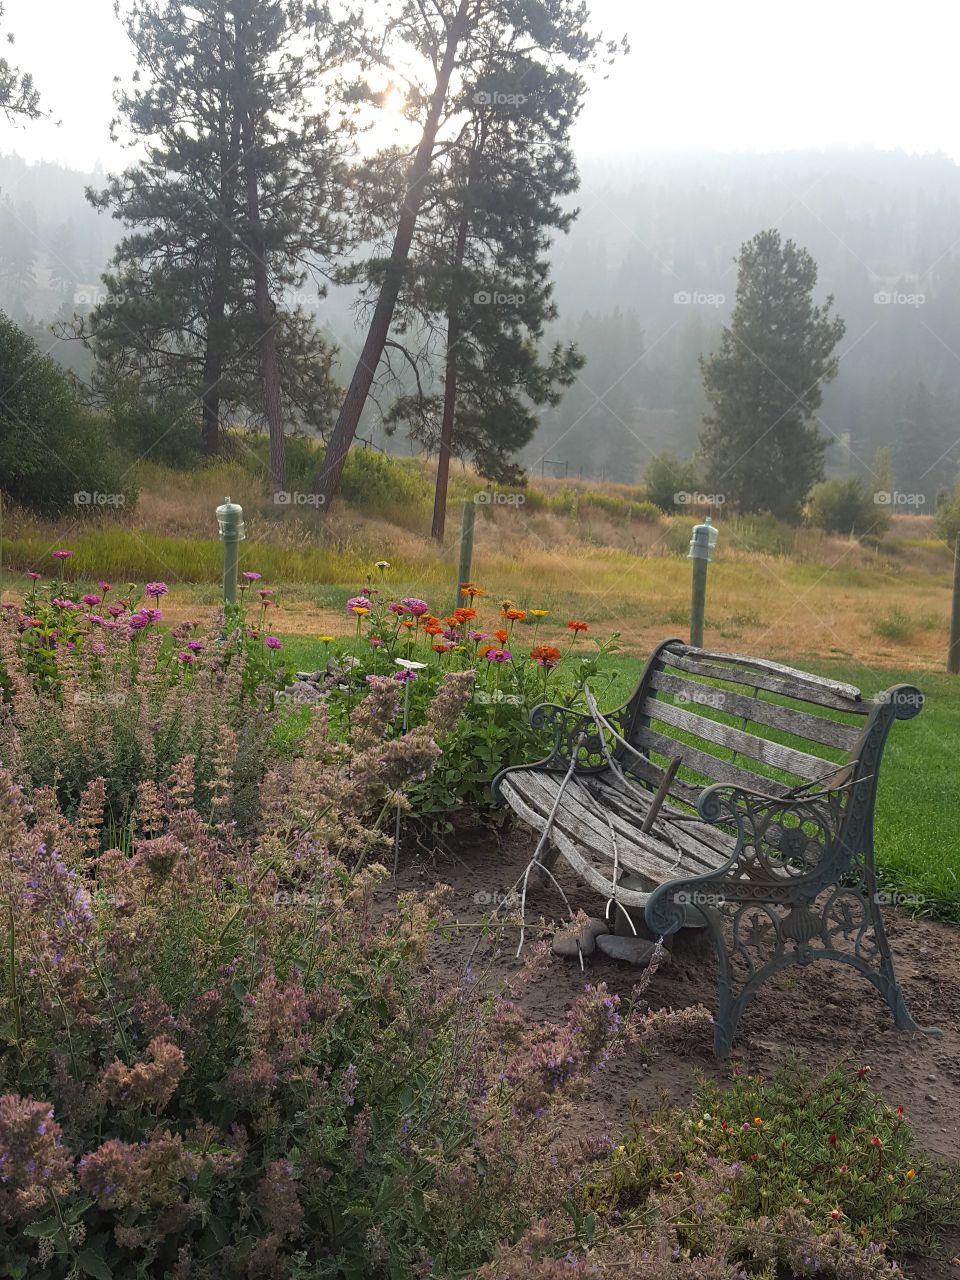 Old wooden bench in the rock garden said against the backdrop of a foggy sunrise mountain